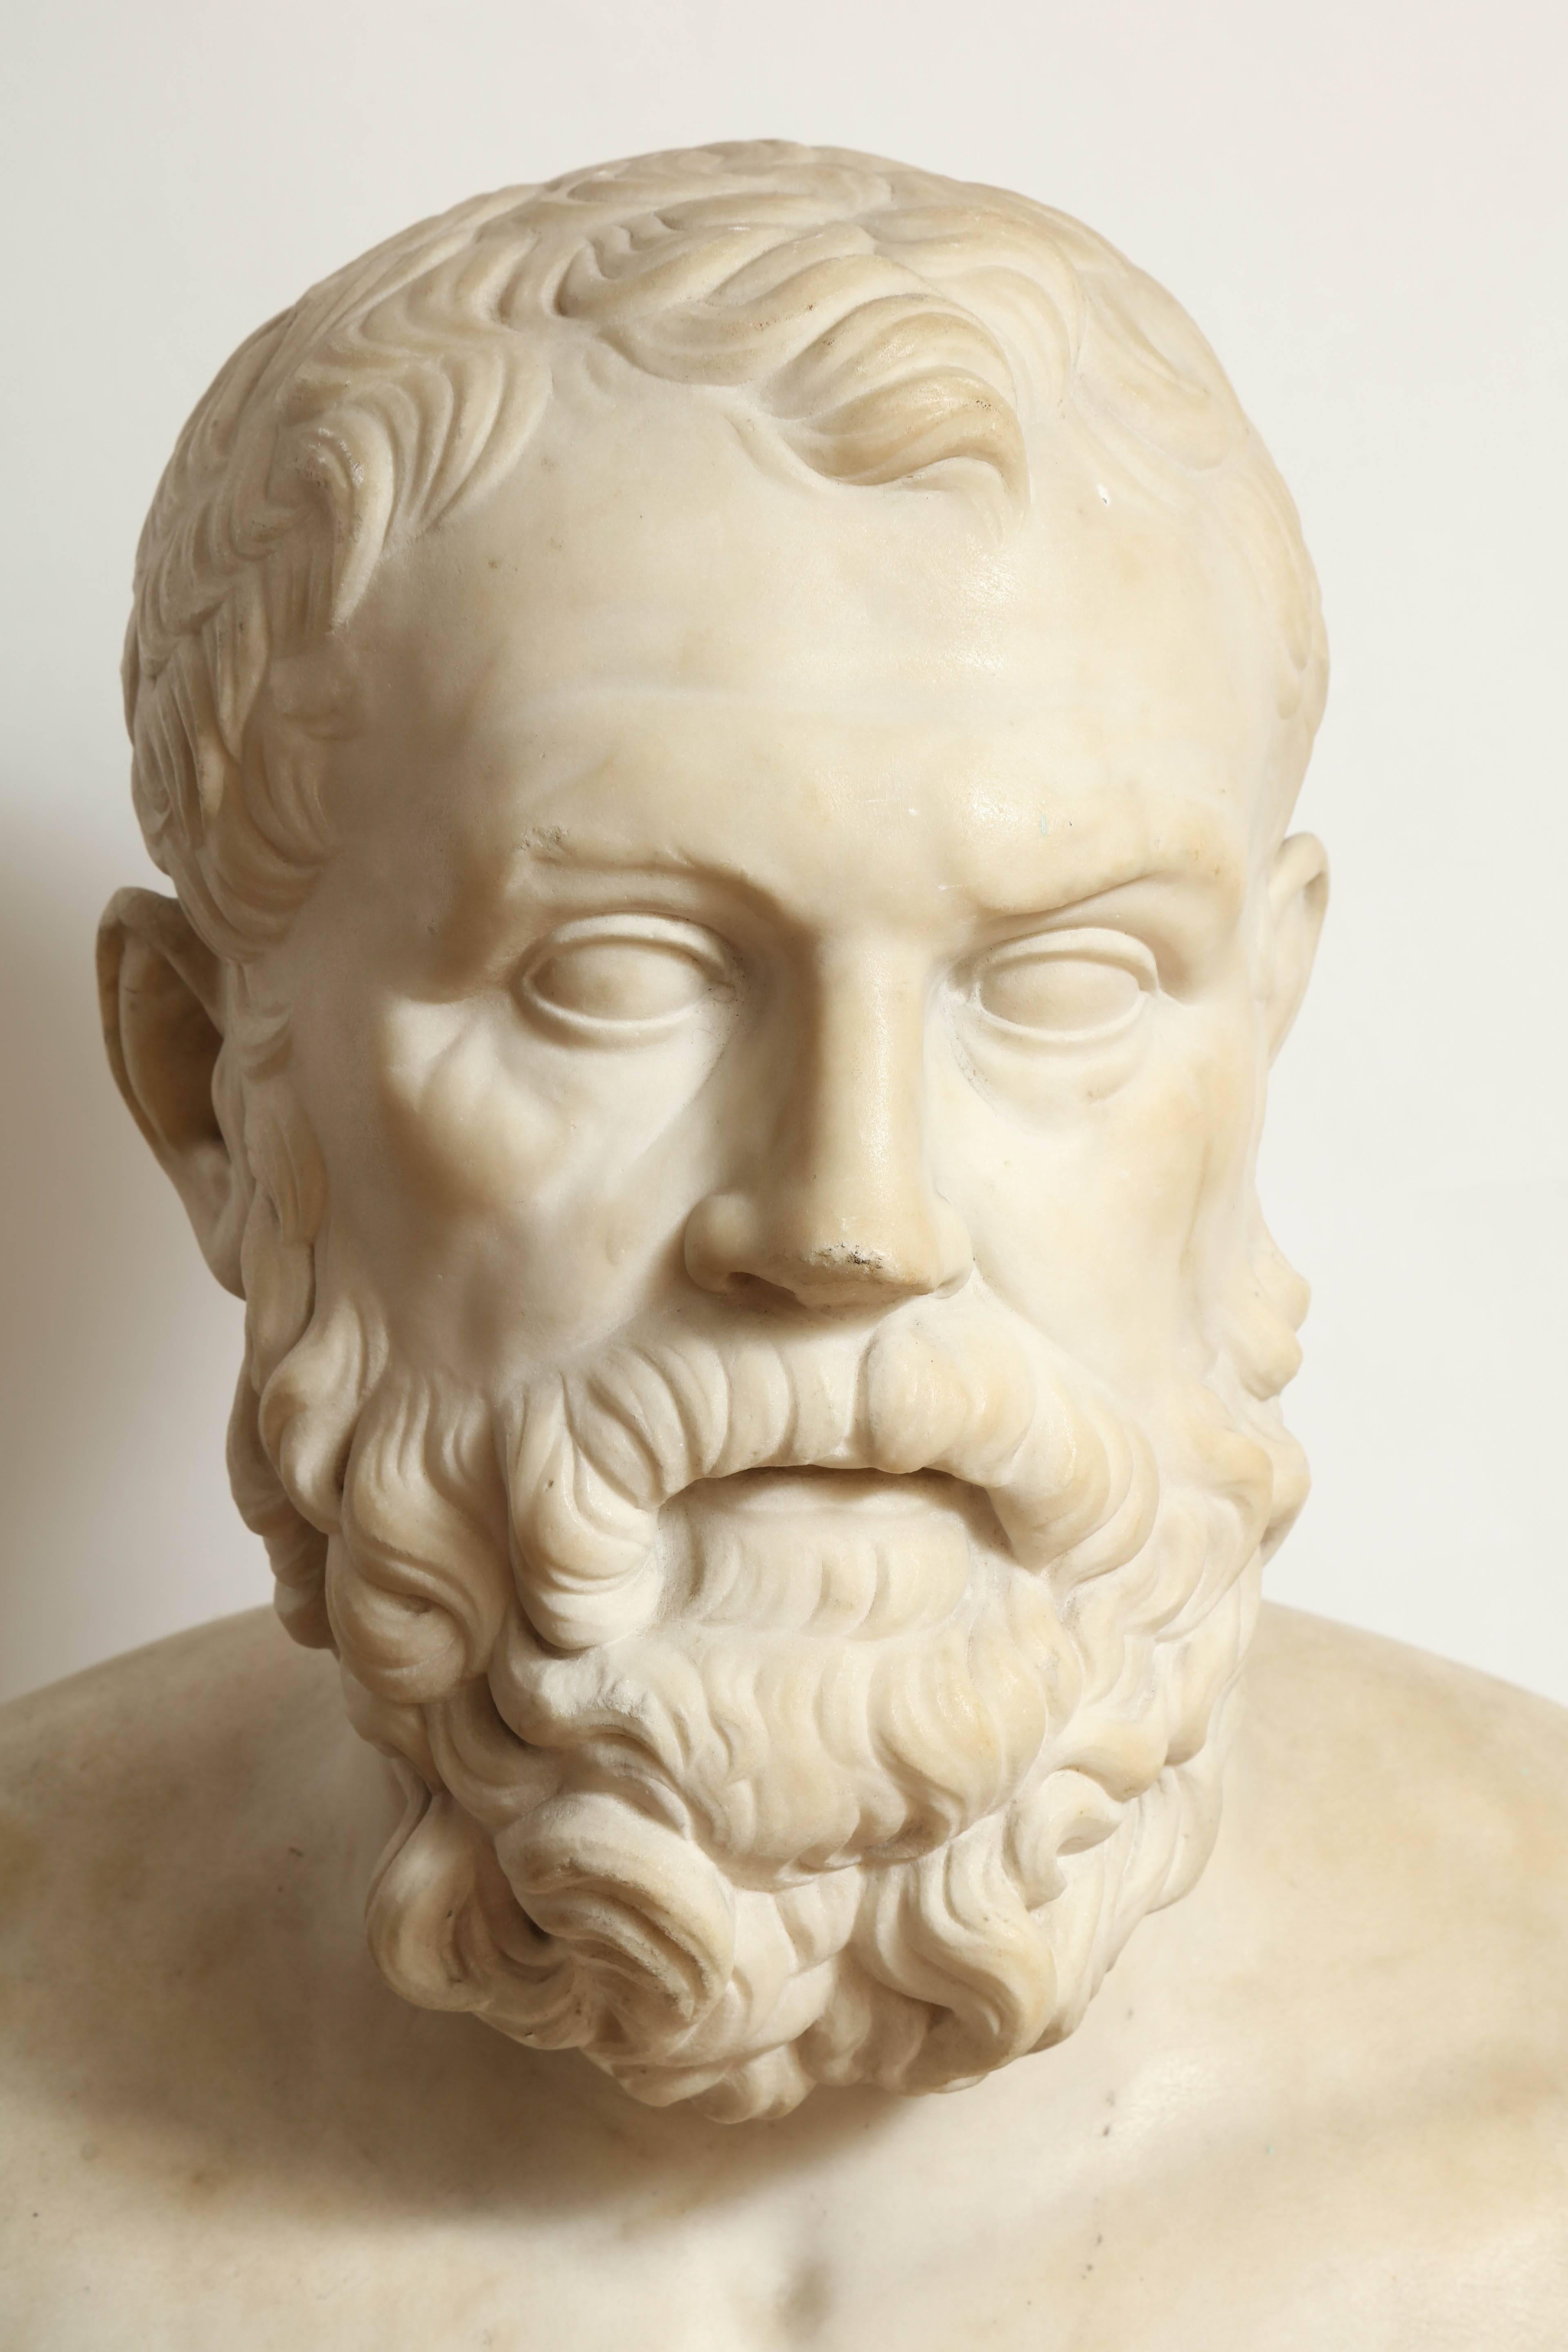 An Italian white marble bust of Solon (638-558), an Athenian statesman, lawmaker, and poet. Solon is responsible for laying the foundations of Athenian democracy, circa 1820.